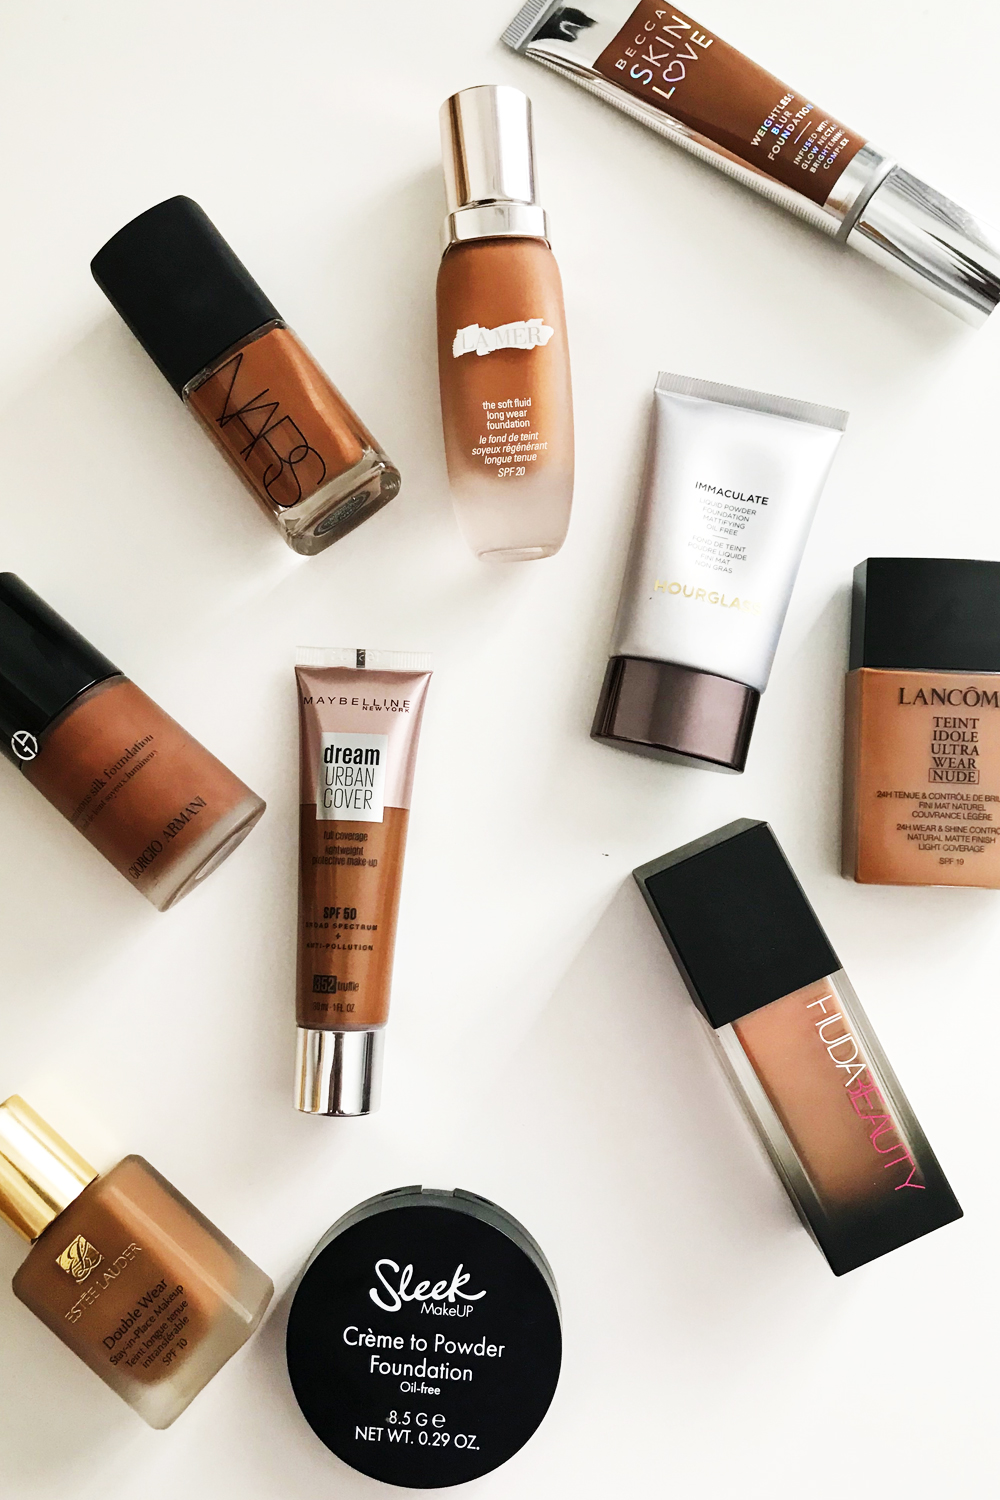 I Just Tried Over 35 Foundations—These Are the Ones I’d Recommend